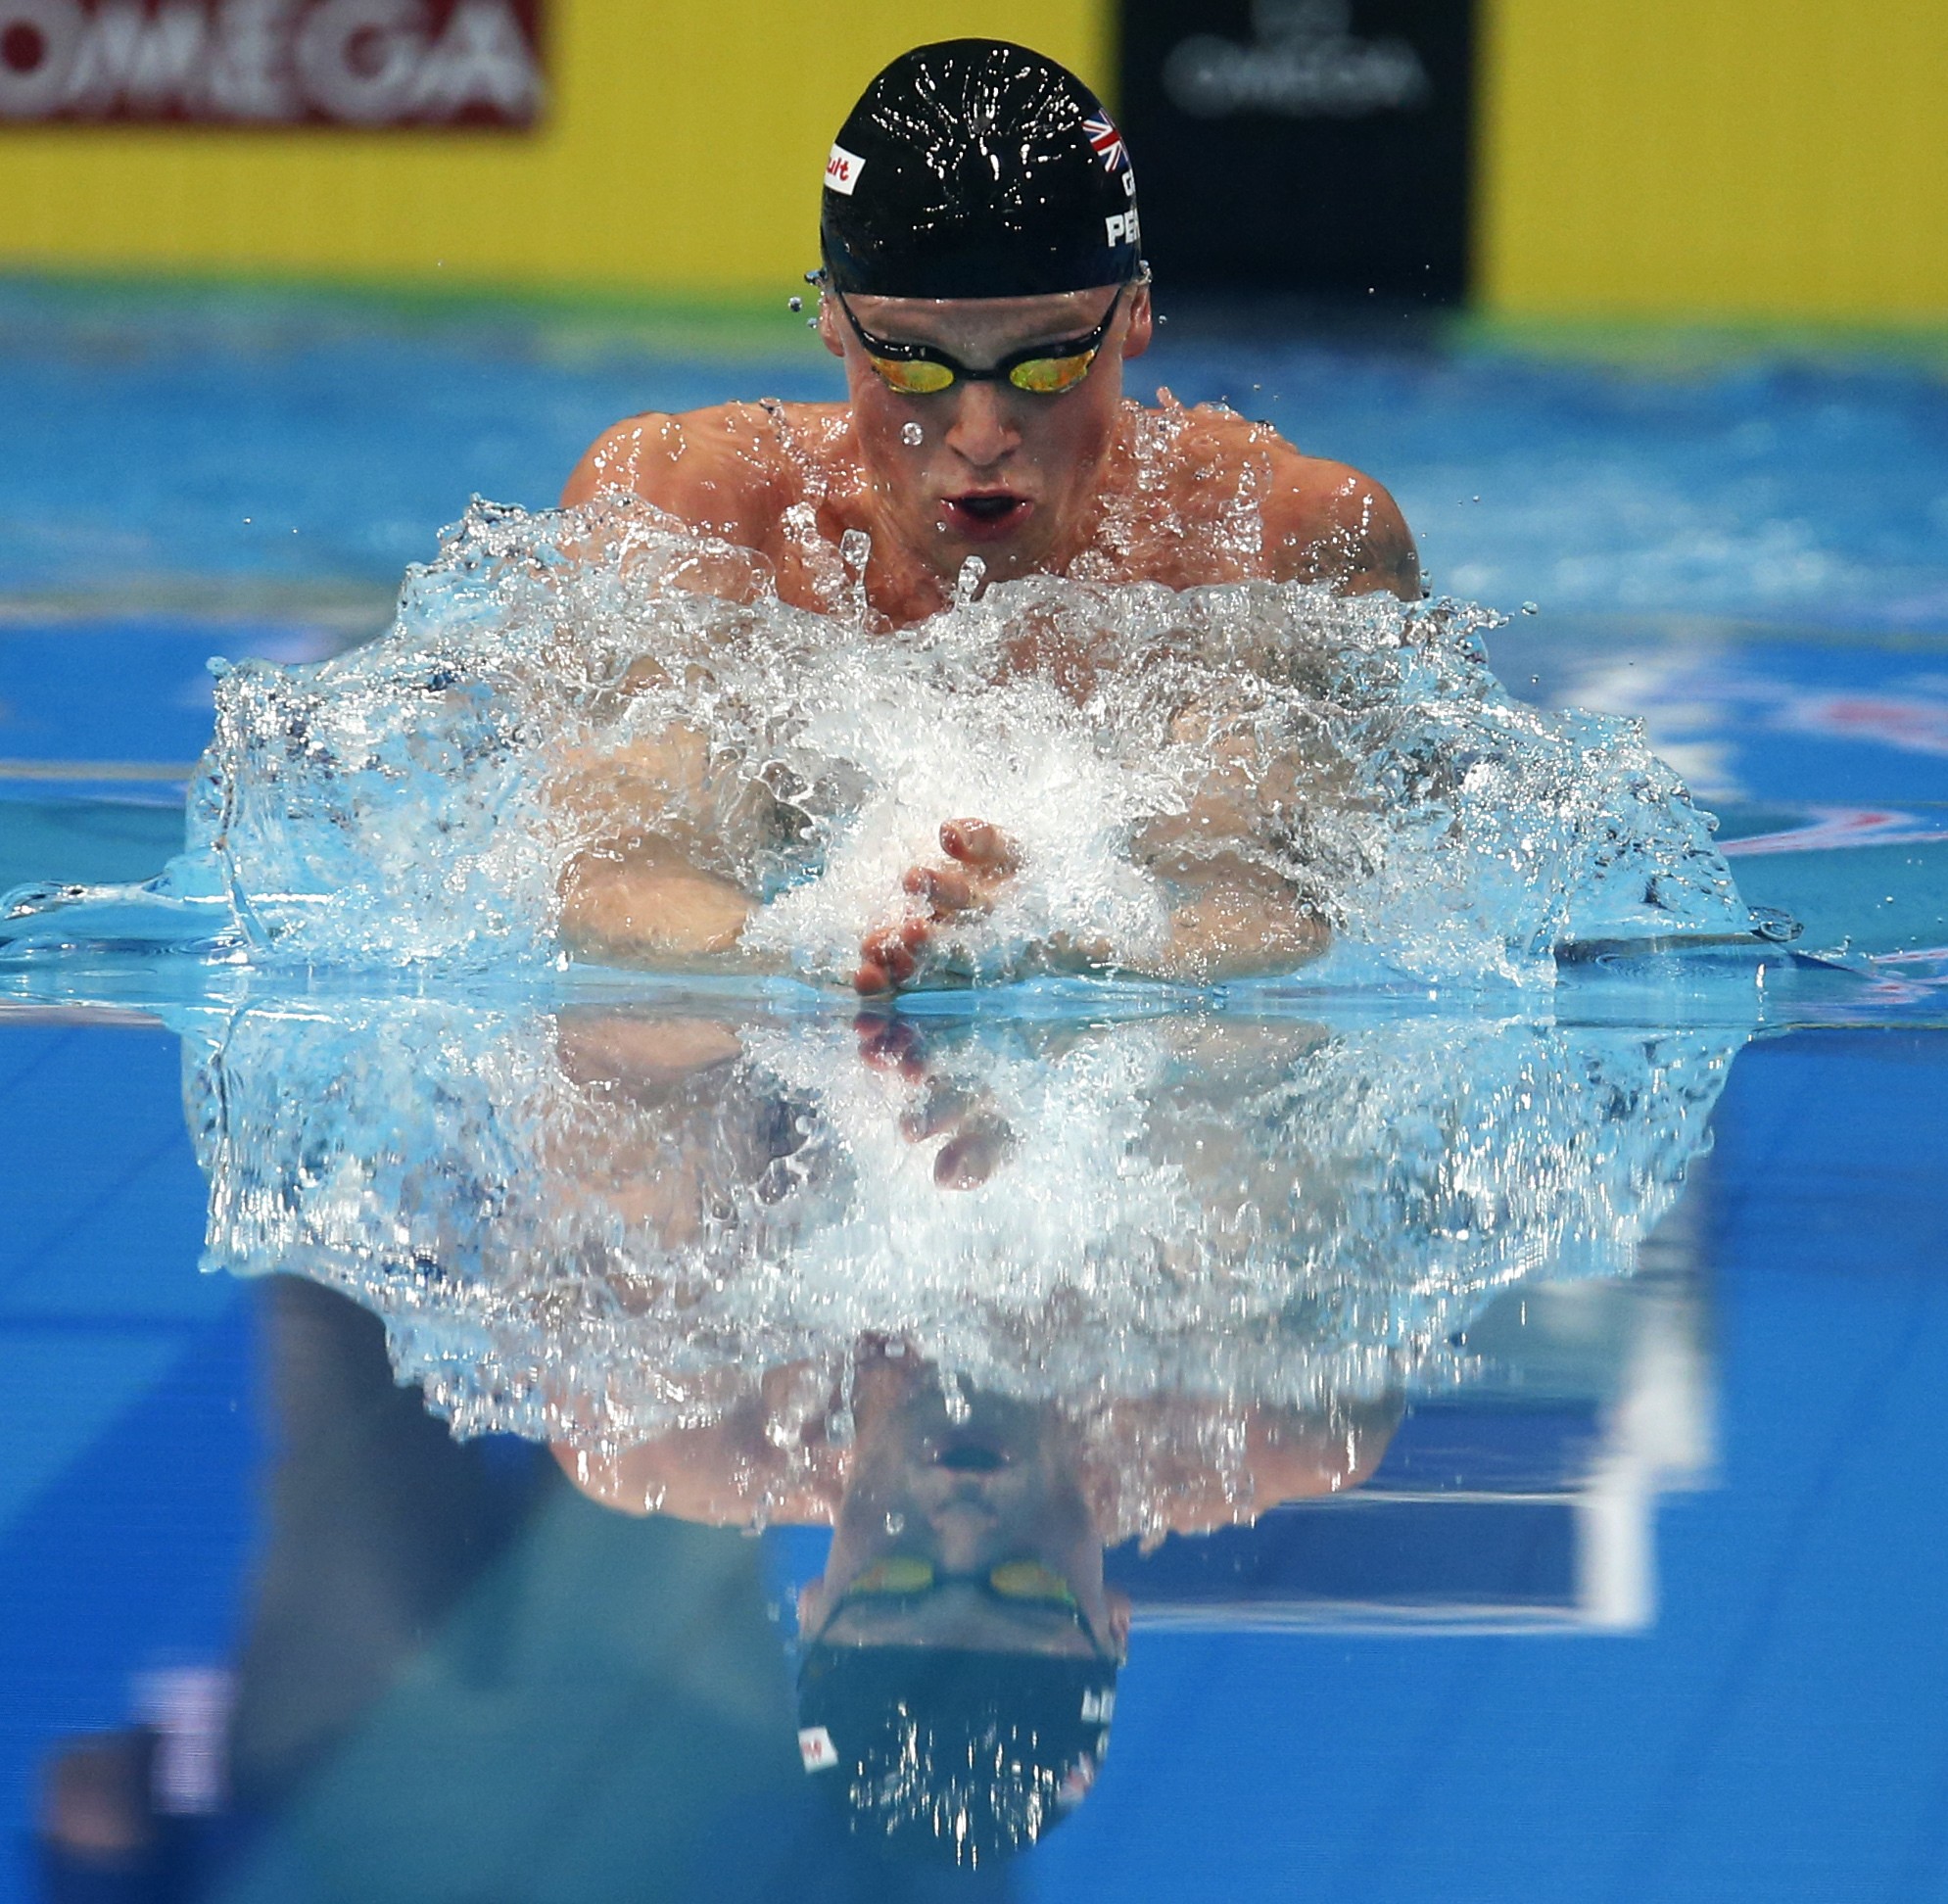 Adam Peaty cuts through the water on his way to gold in the 100m breaststroke at the world championships in Budapest. Photo: AP